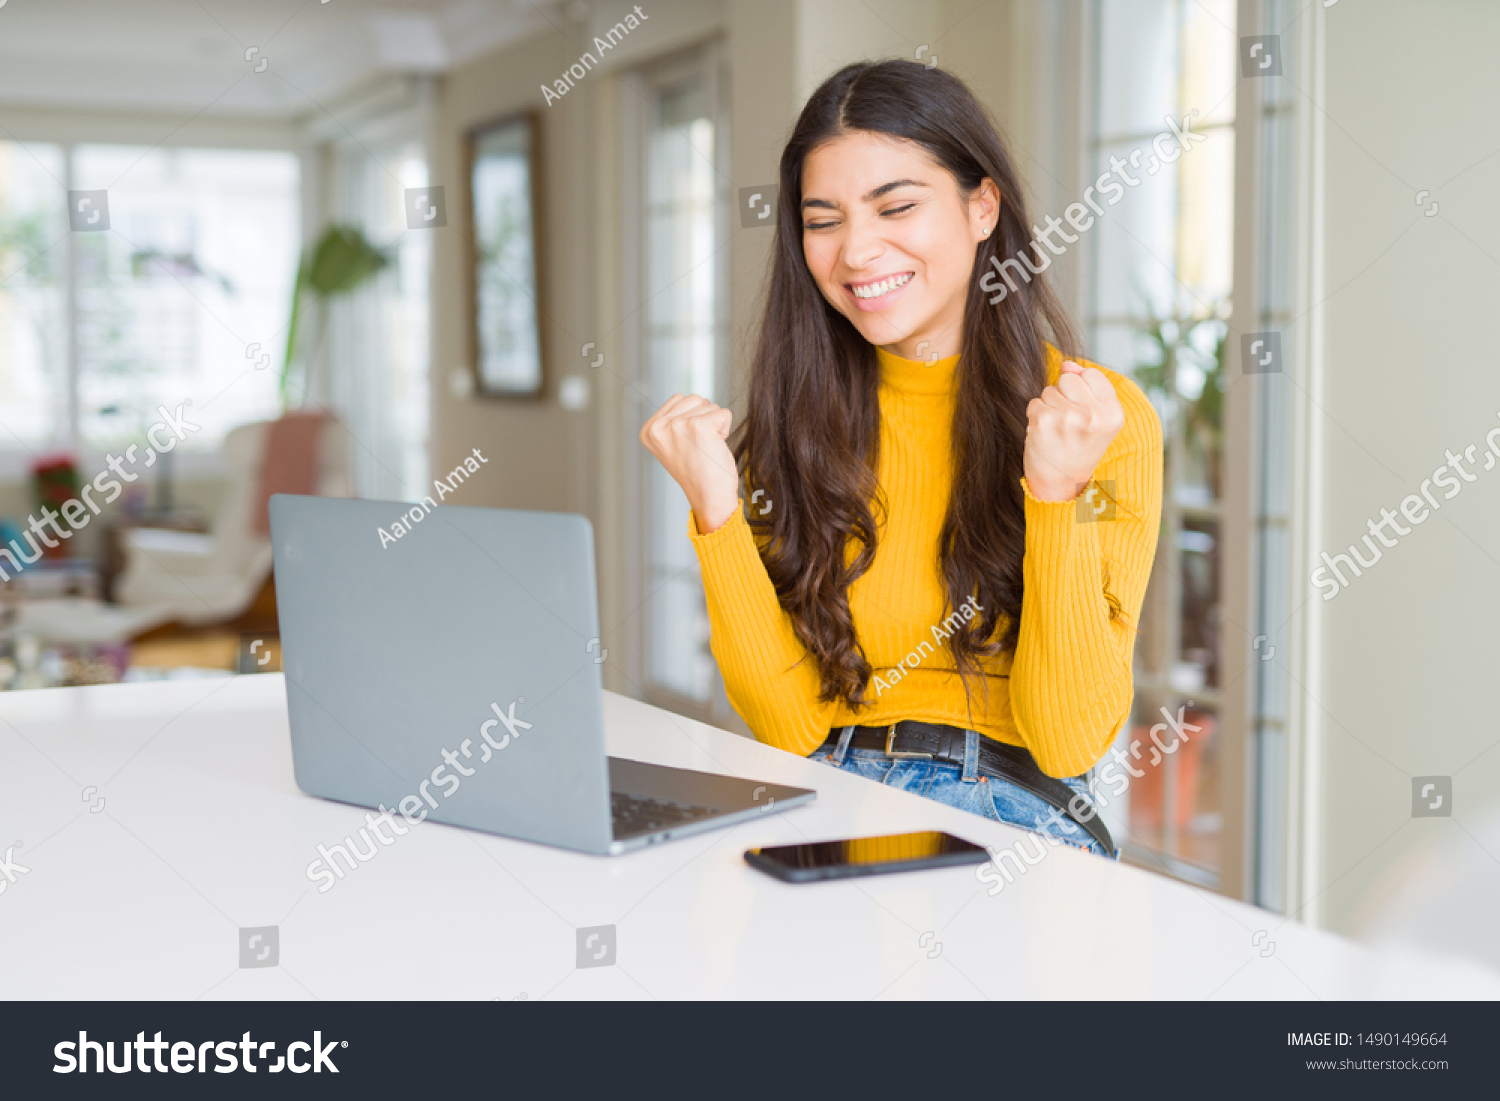 Young woman using computer laptop very happy and excited doing winner gesture with arms raised, smiling and screaming for success. Celebration concept. #1490149664